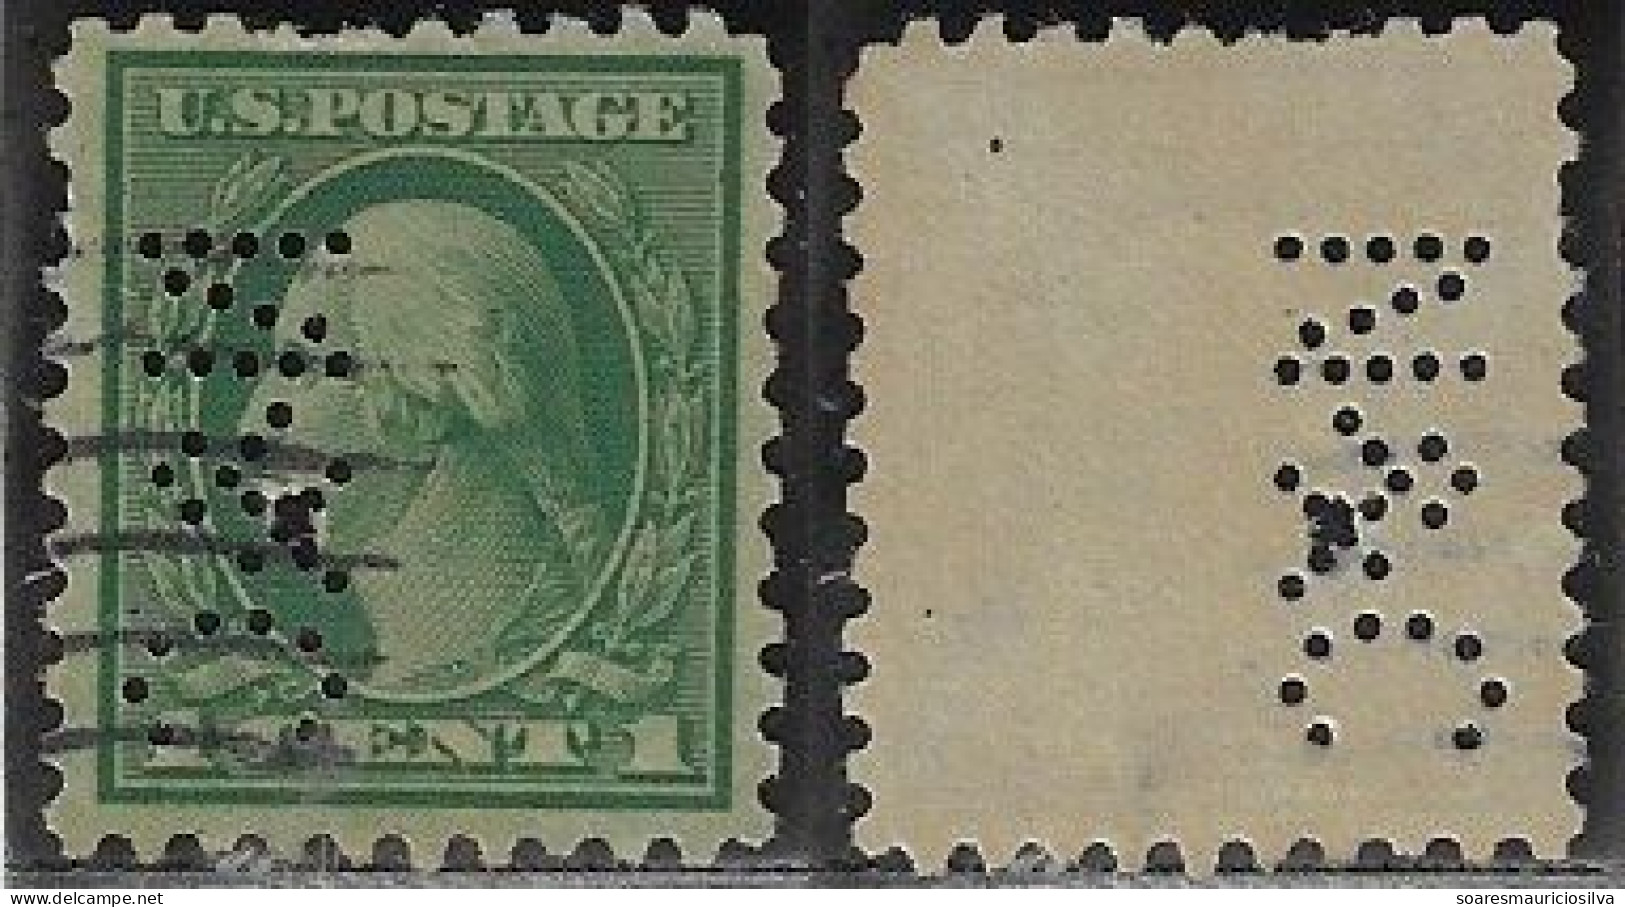 USA United States 1917/1919 Stamp With Perfin N&C Unidentified In Catalog Lochung Perfore - Zähnungen (Perfins)